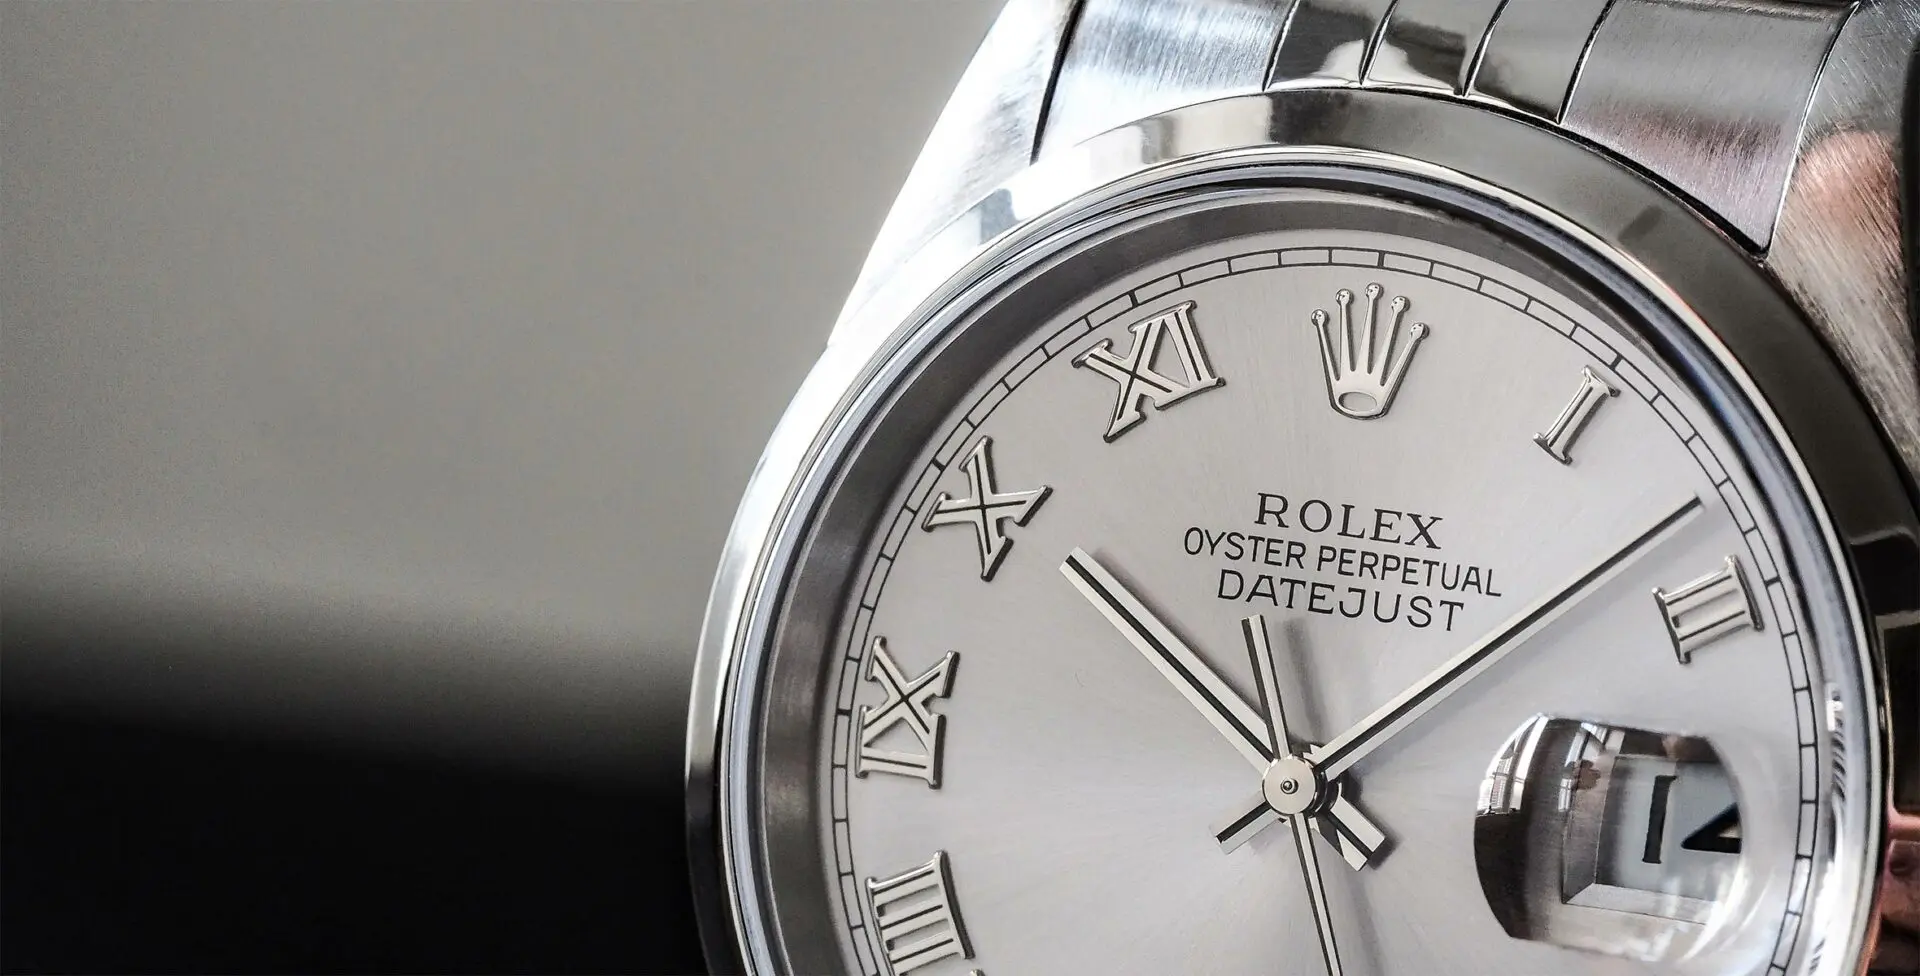 24 Months Wearing the Rolex Datejust – An In-depth Review